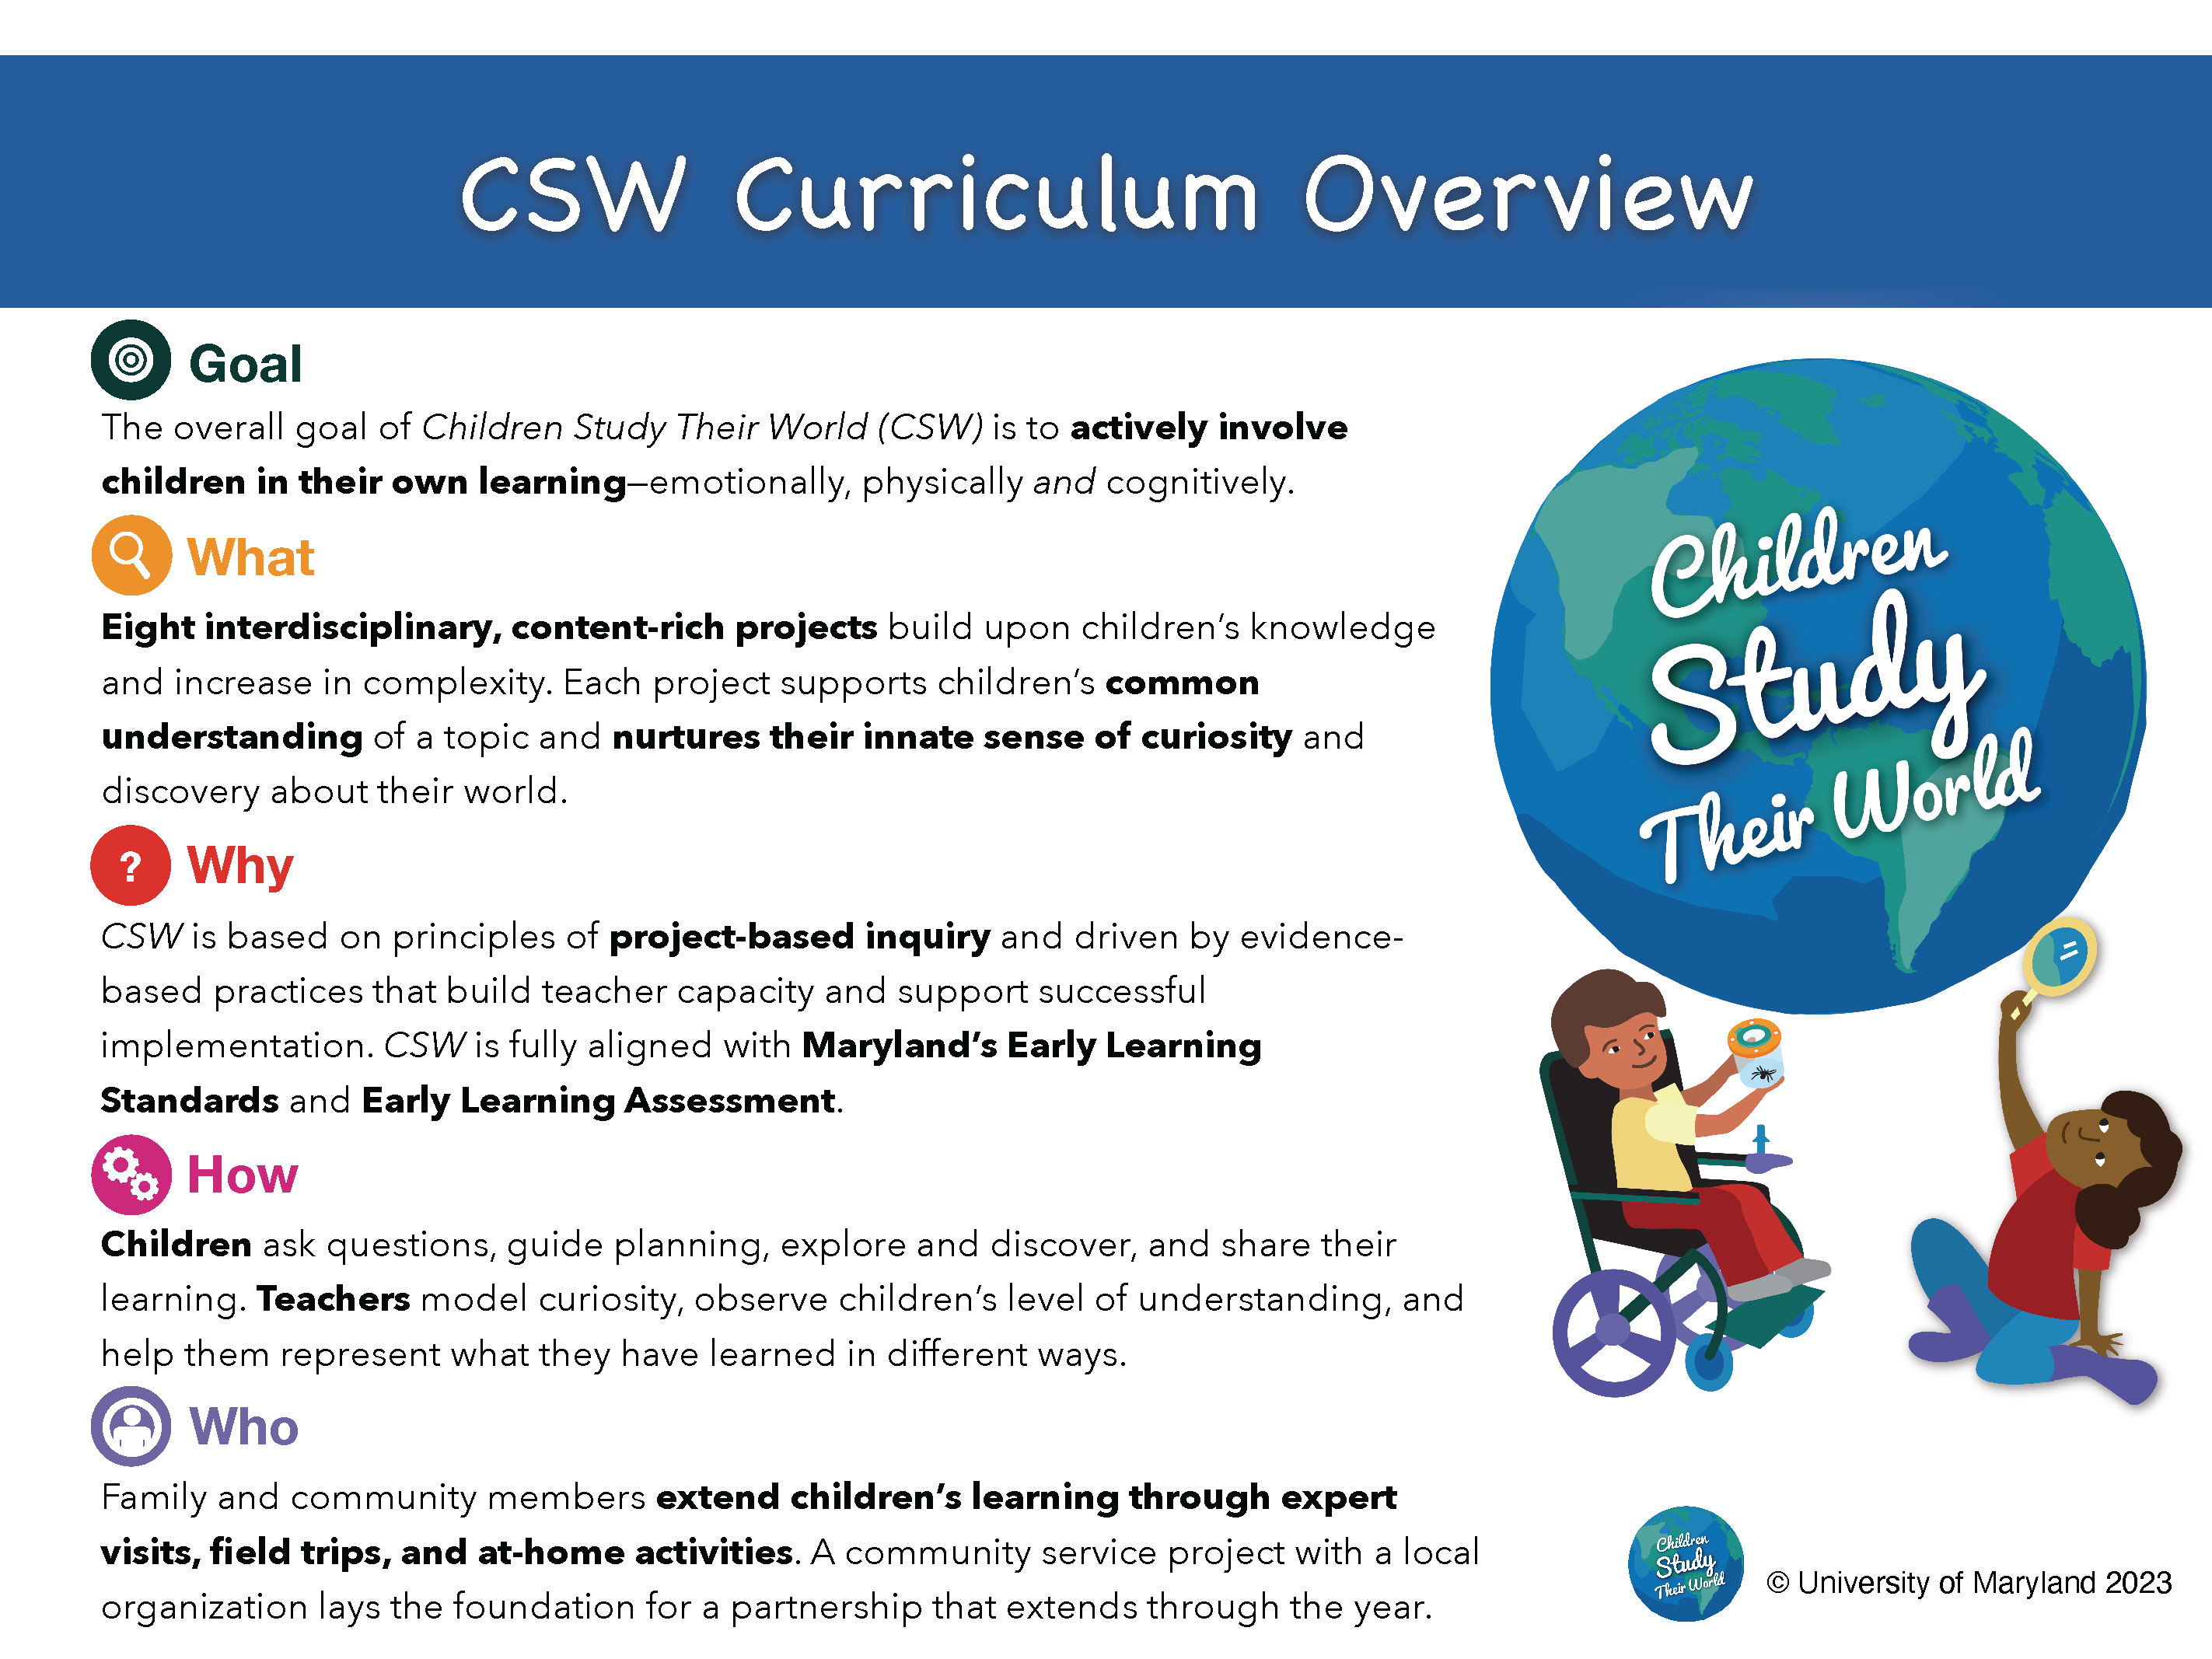 CSW Overview Infographic: click to view PDF